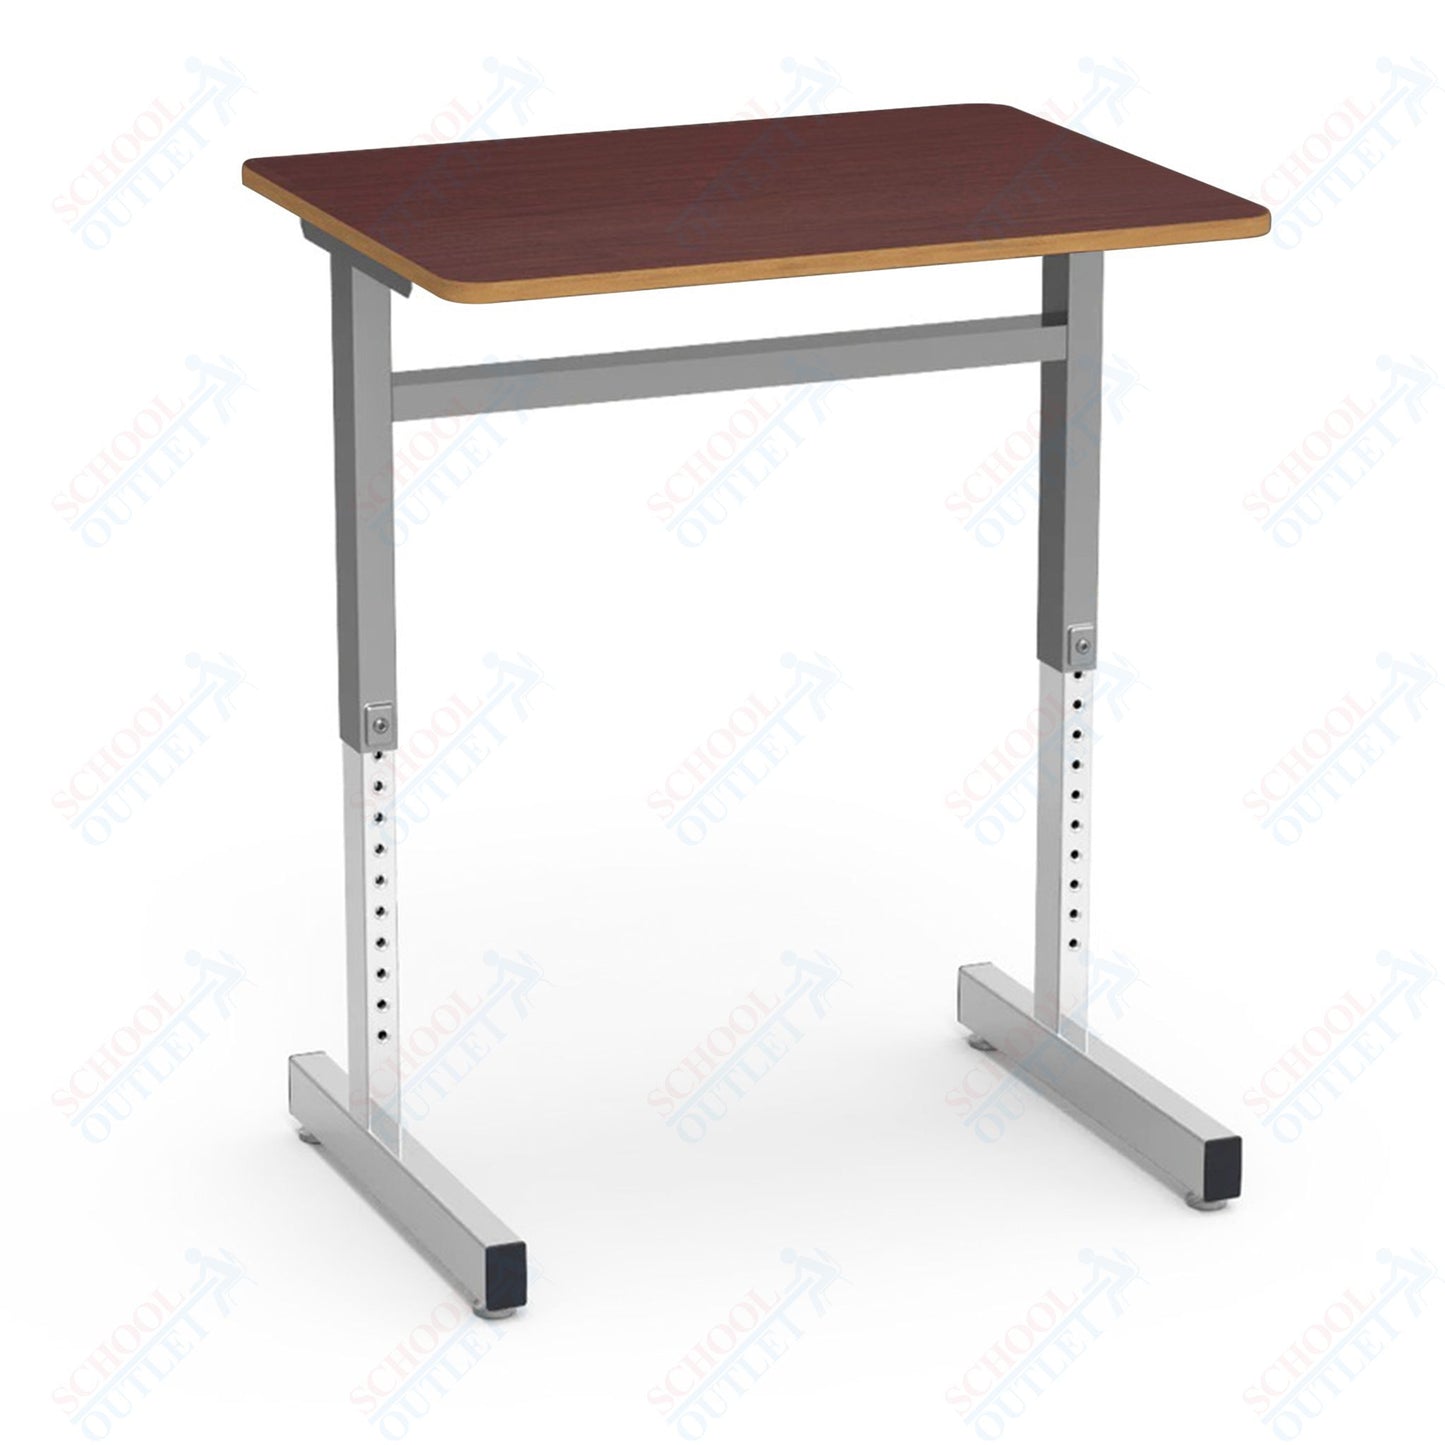 Virco 8771 - 8771 Series Student Desk with Cantilever Leg, 20" X 26" Top, 22" to 30" height range